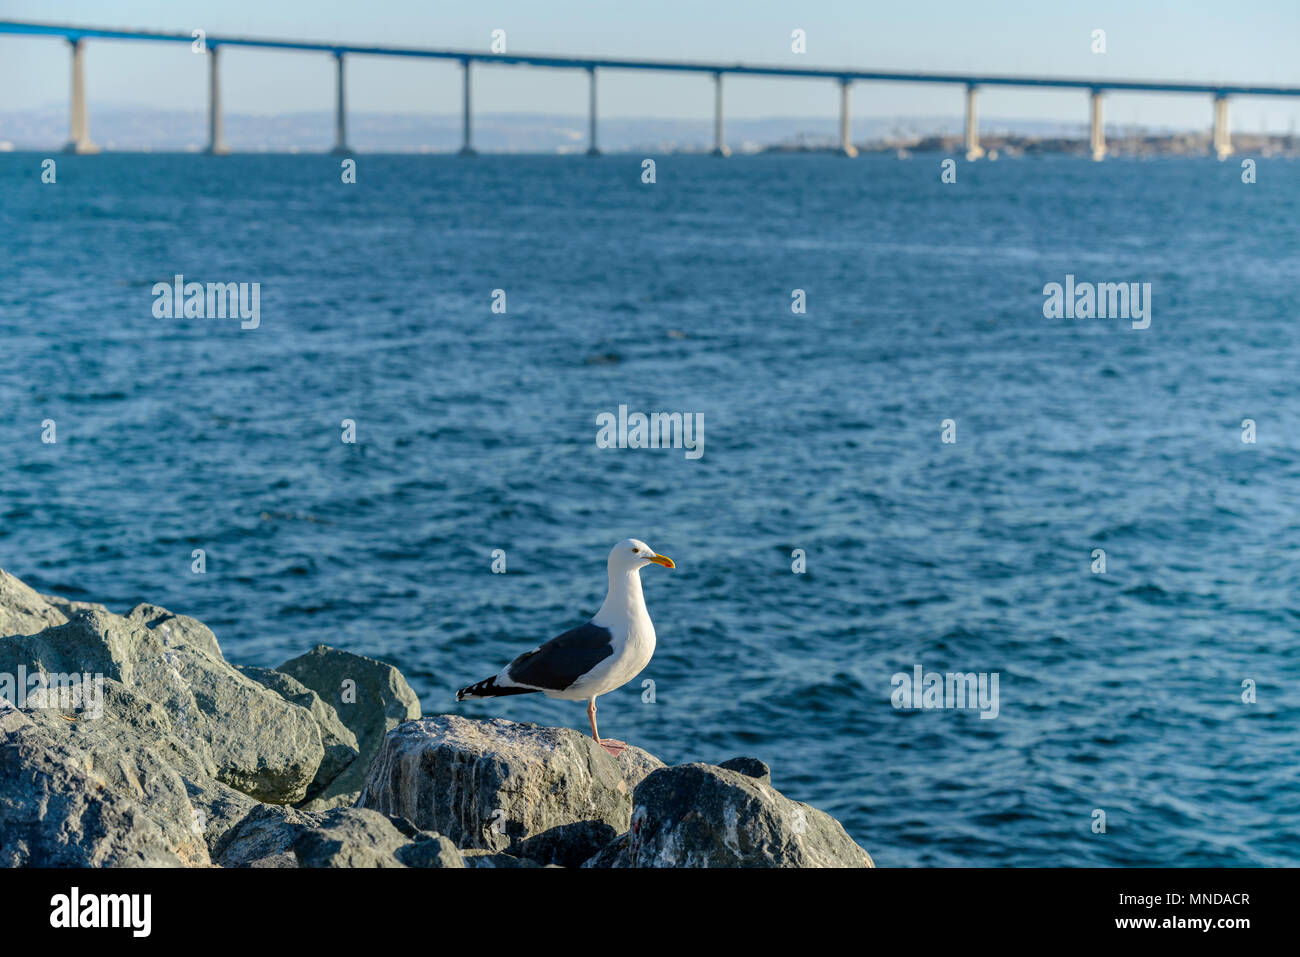 Seagull at San Diego Bay - A seagull standing on a rock at side of San Diego Bay, with Coronado Bridge in the background. San Diego, California, USA. Stock Photo